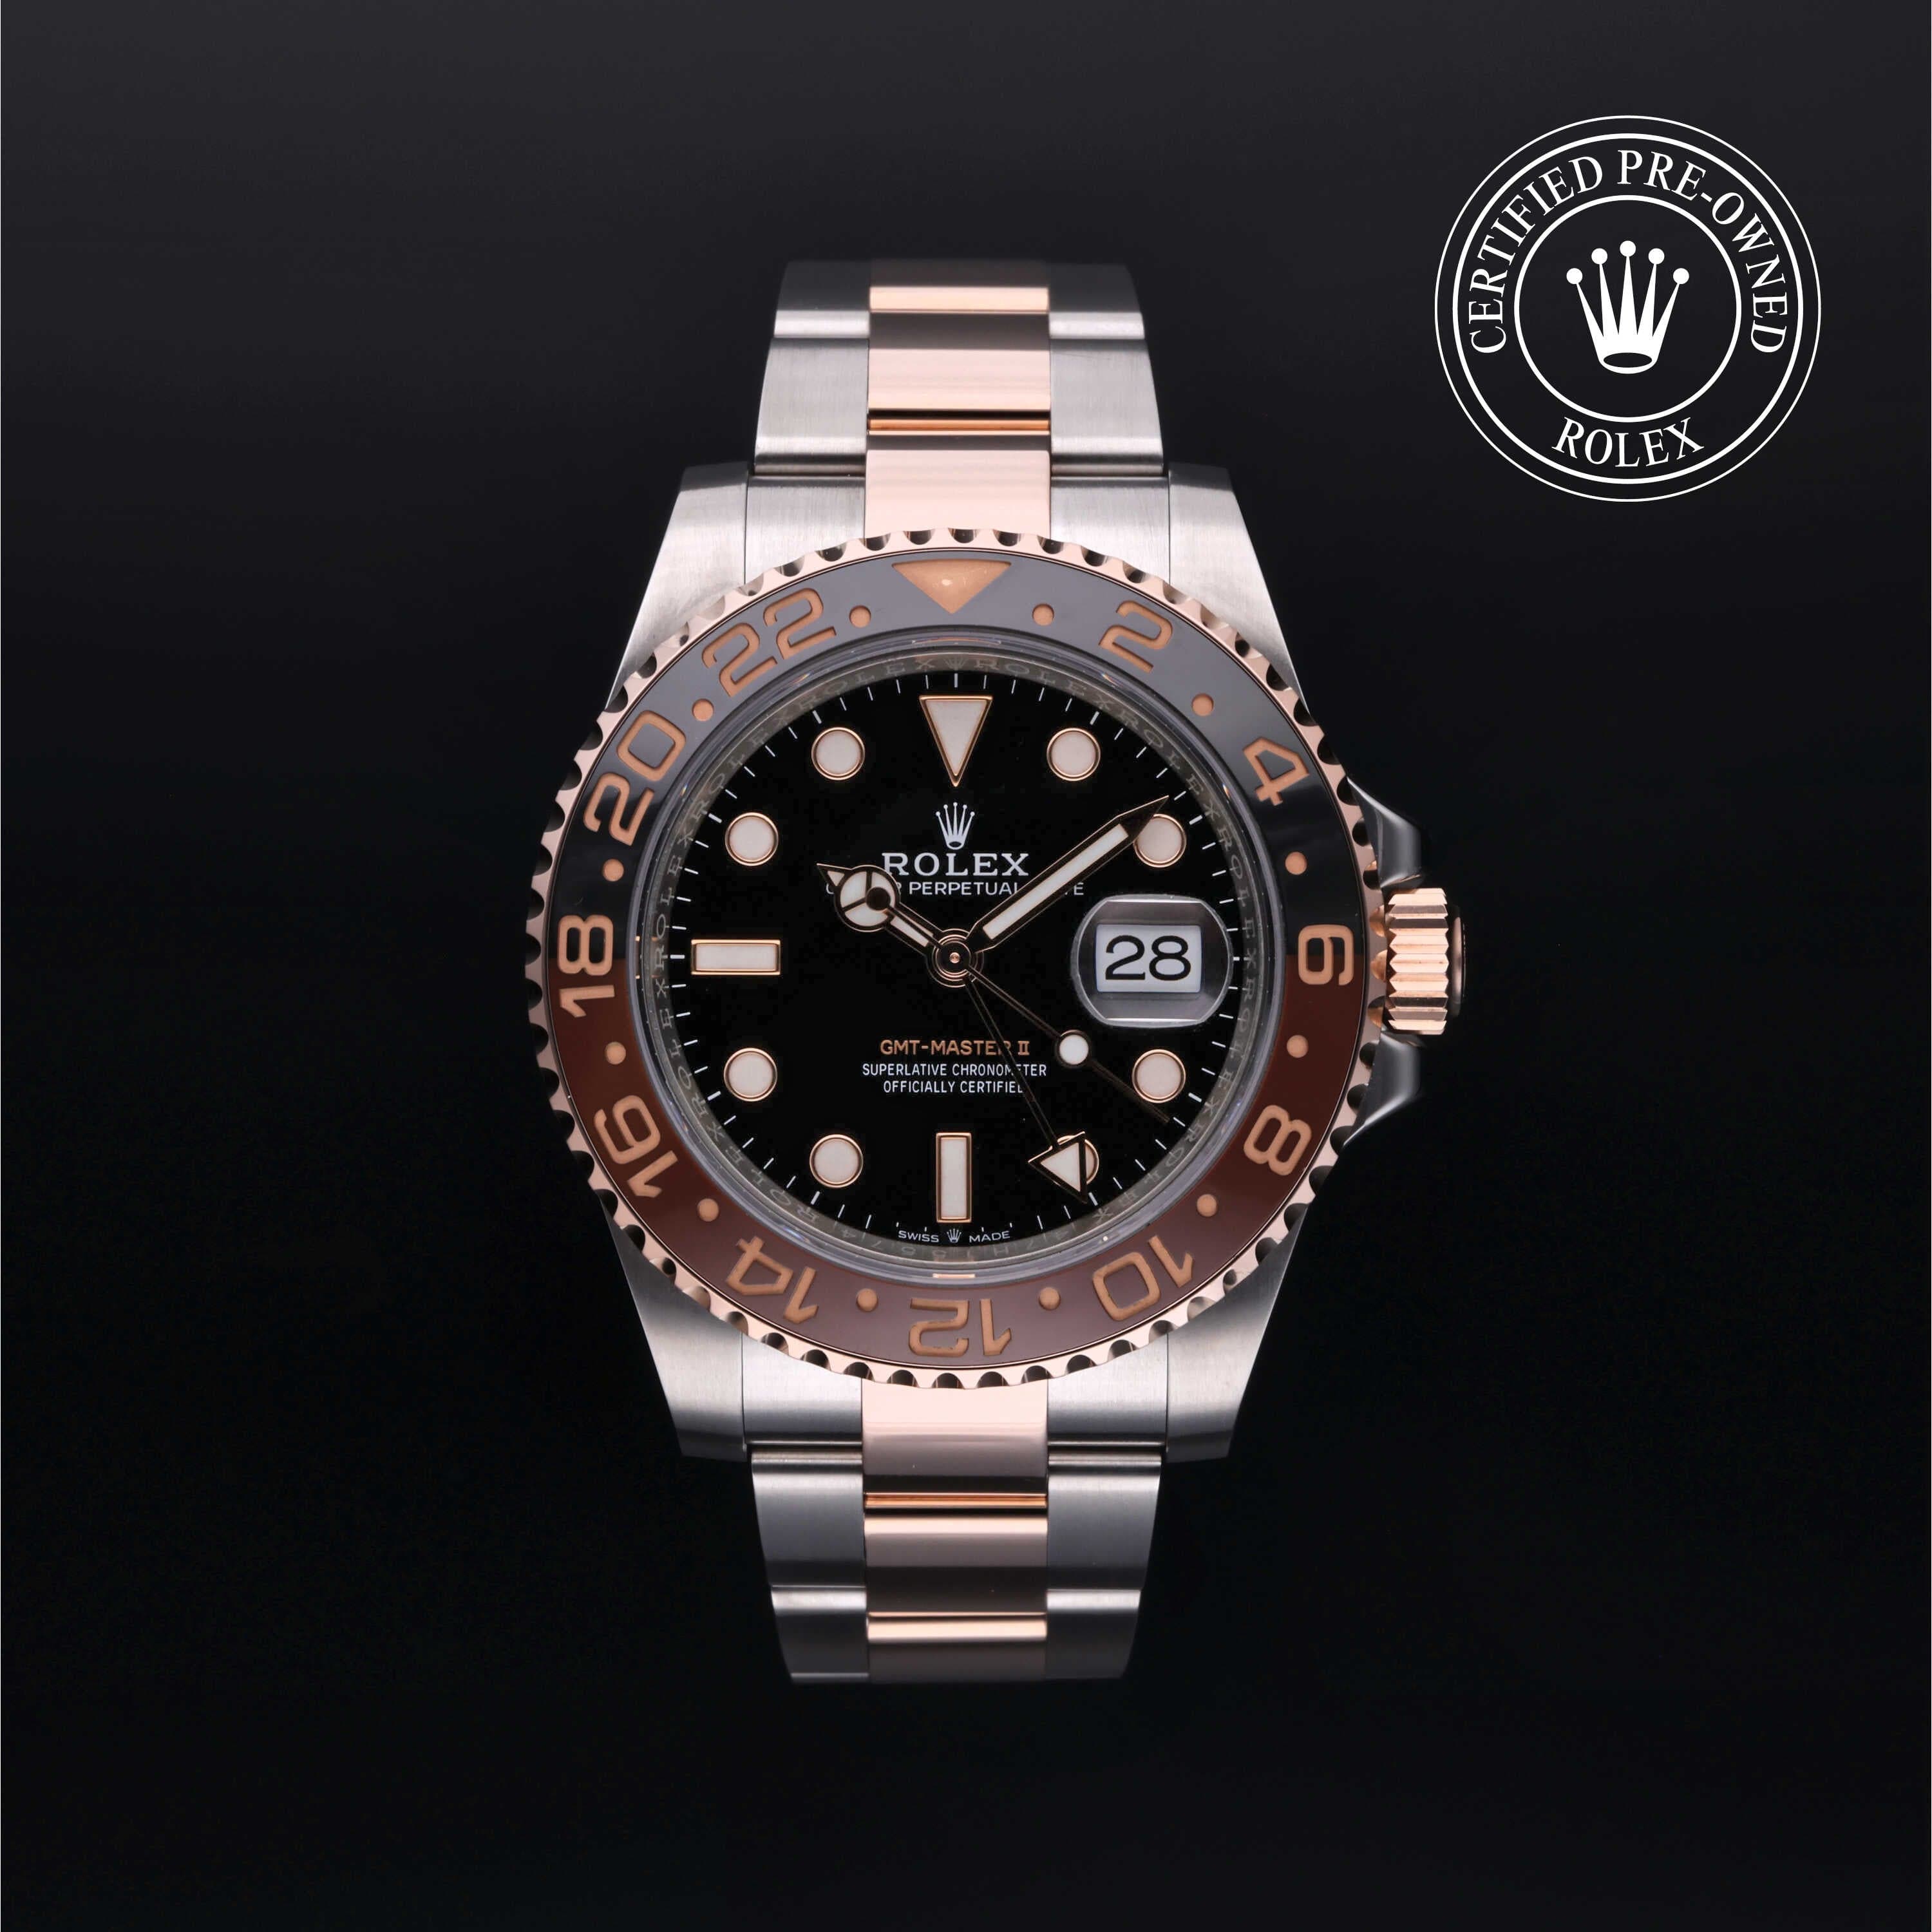 Rolex Certified Pre-Owned GMT Master II in Oyster, 40 mm, Stainless Steel and everose gold 126711CHNR watch available at Long's Jewelers.